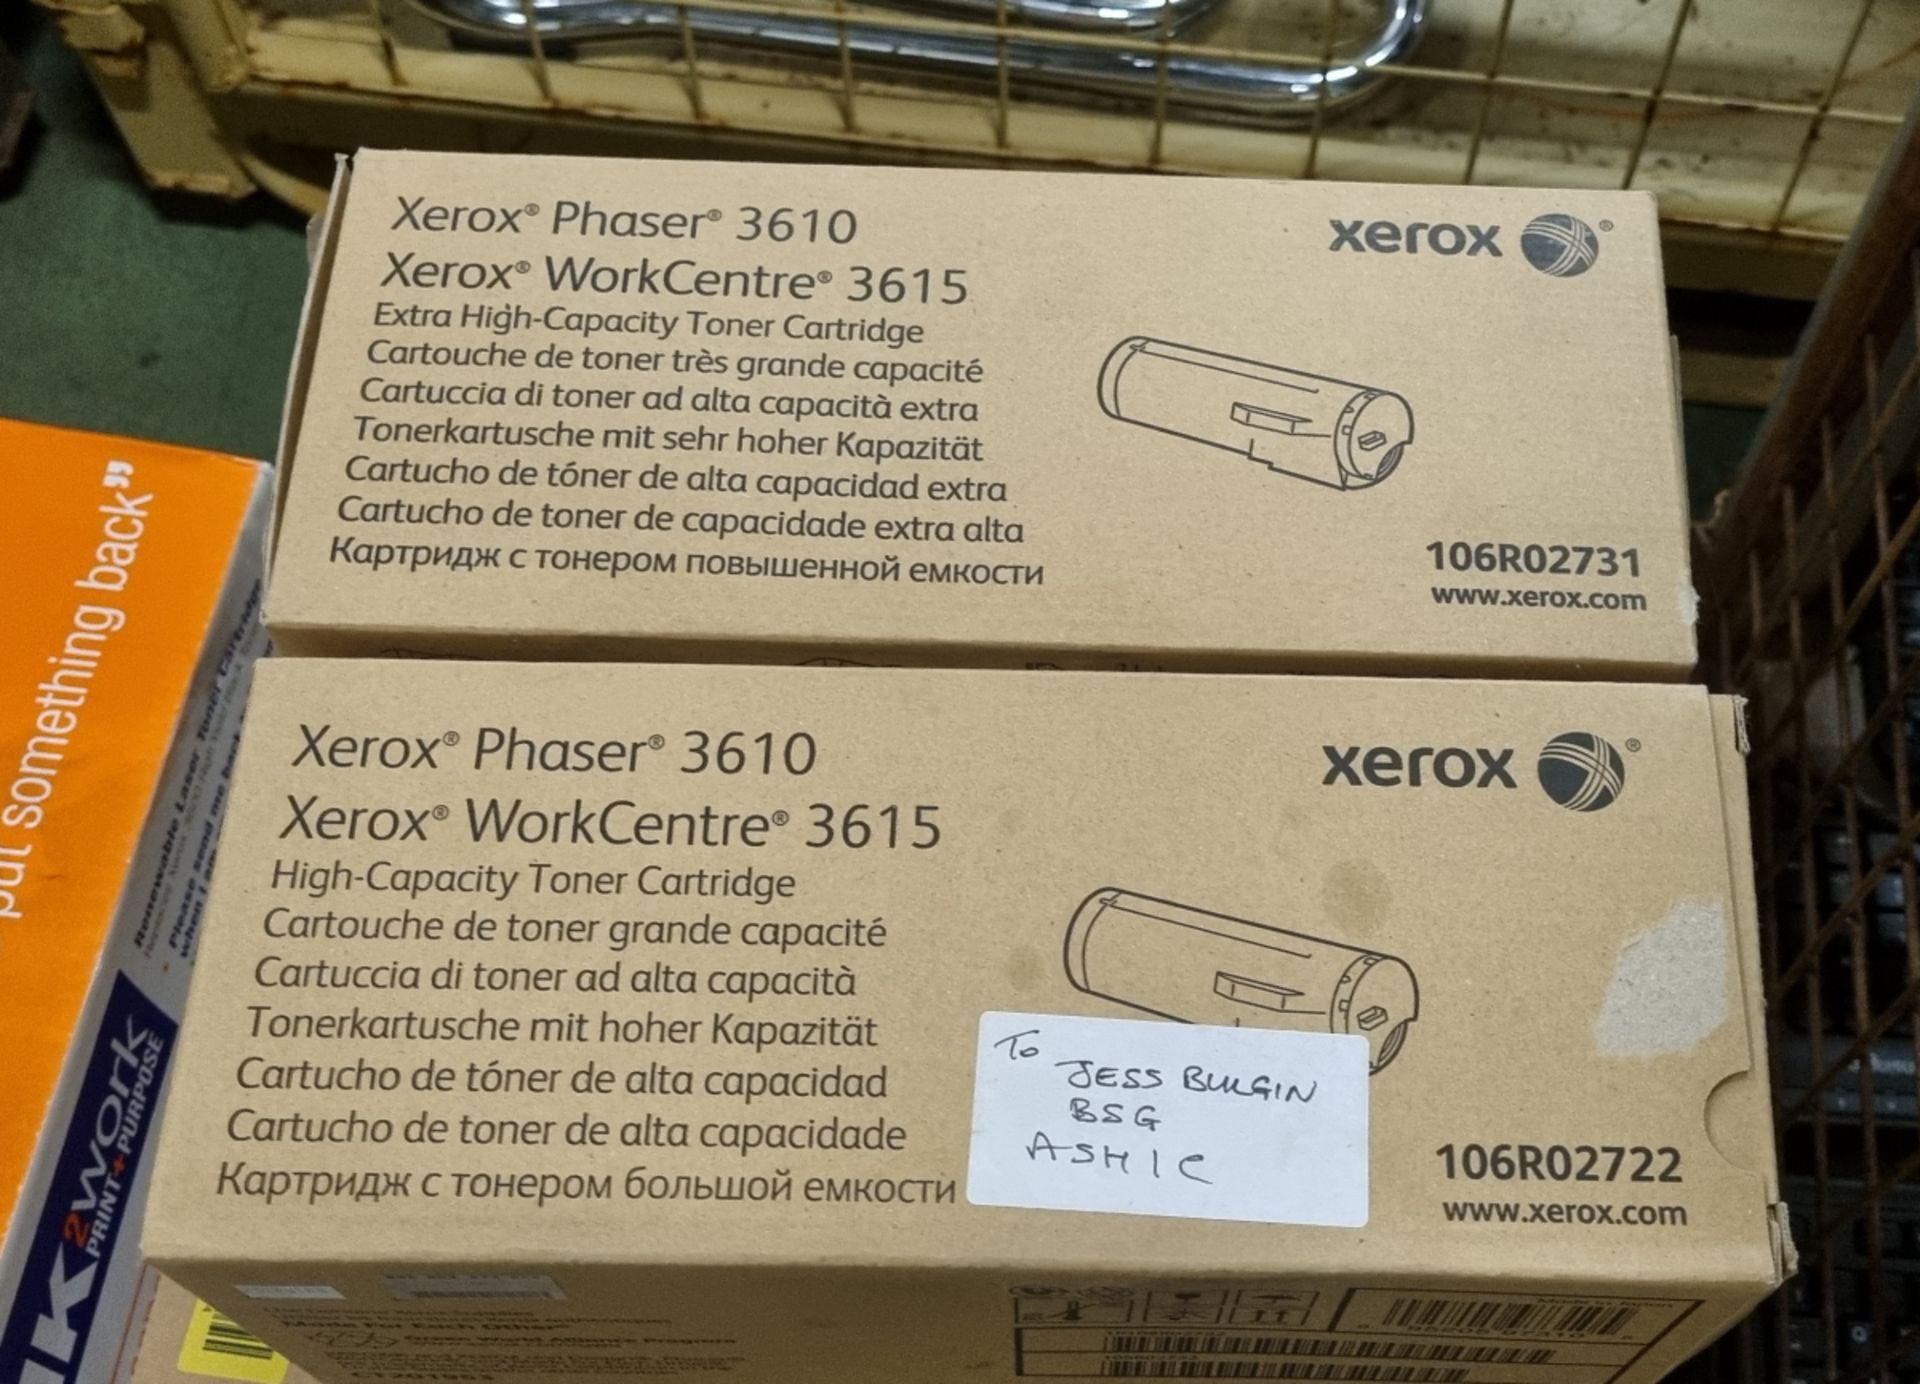 28x boxes of toners and transfer rollers - Xerox 6360, Xerox 7750, Xerox 3610 and HP 3600 - Image 6 of 7